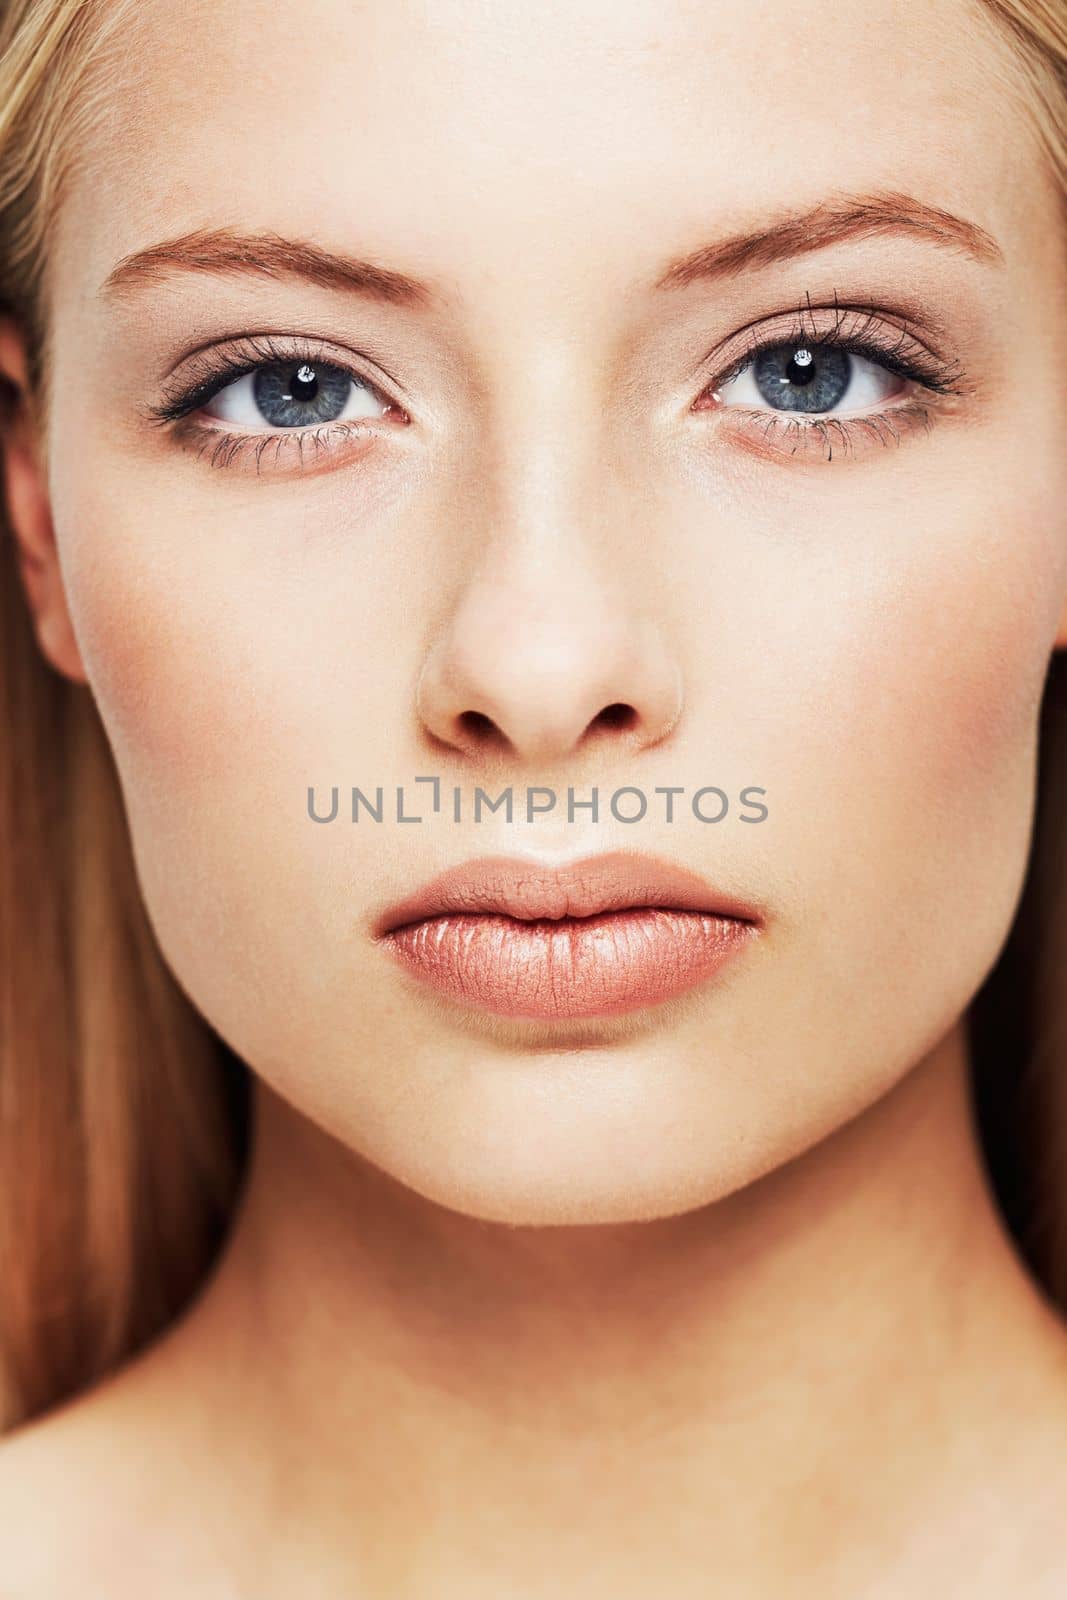 Her beauty is all natural. Portrait of a beautiful young woman in the studio